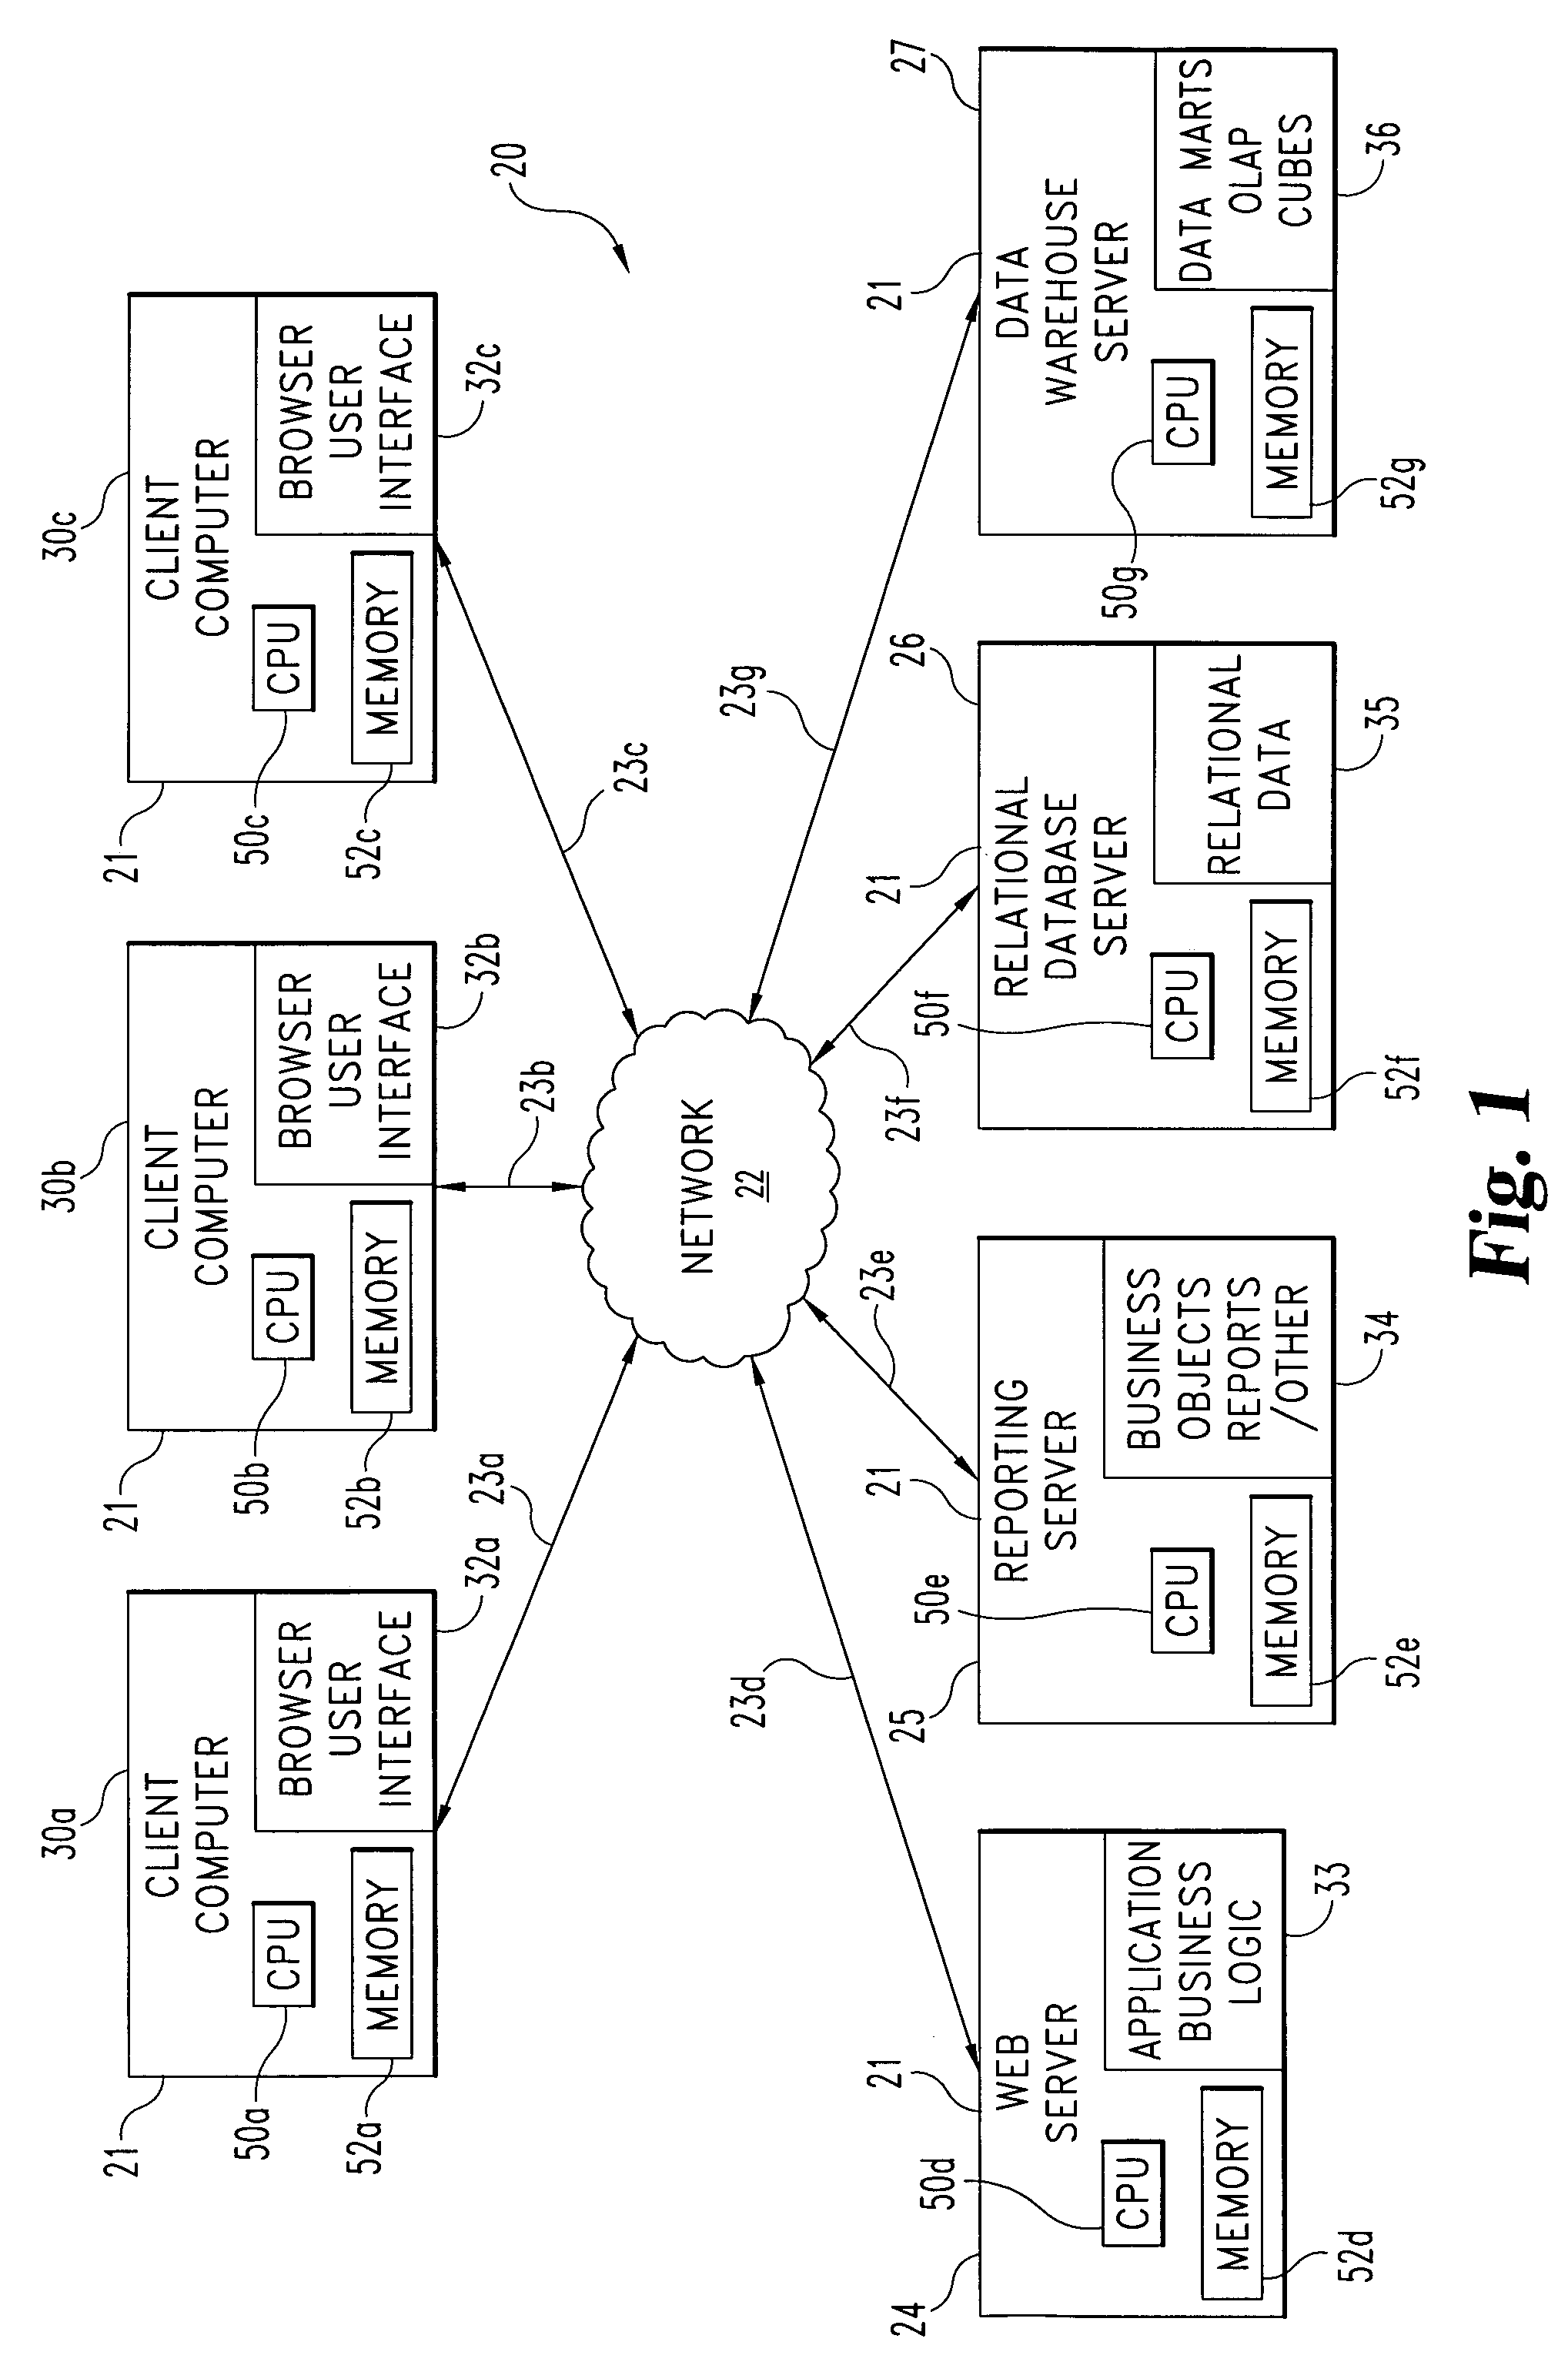 System and method for providing a browser-based user interface